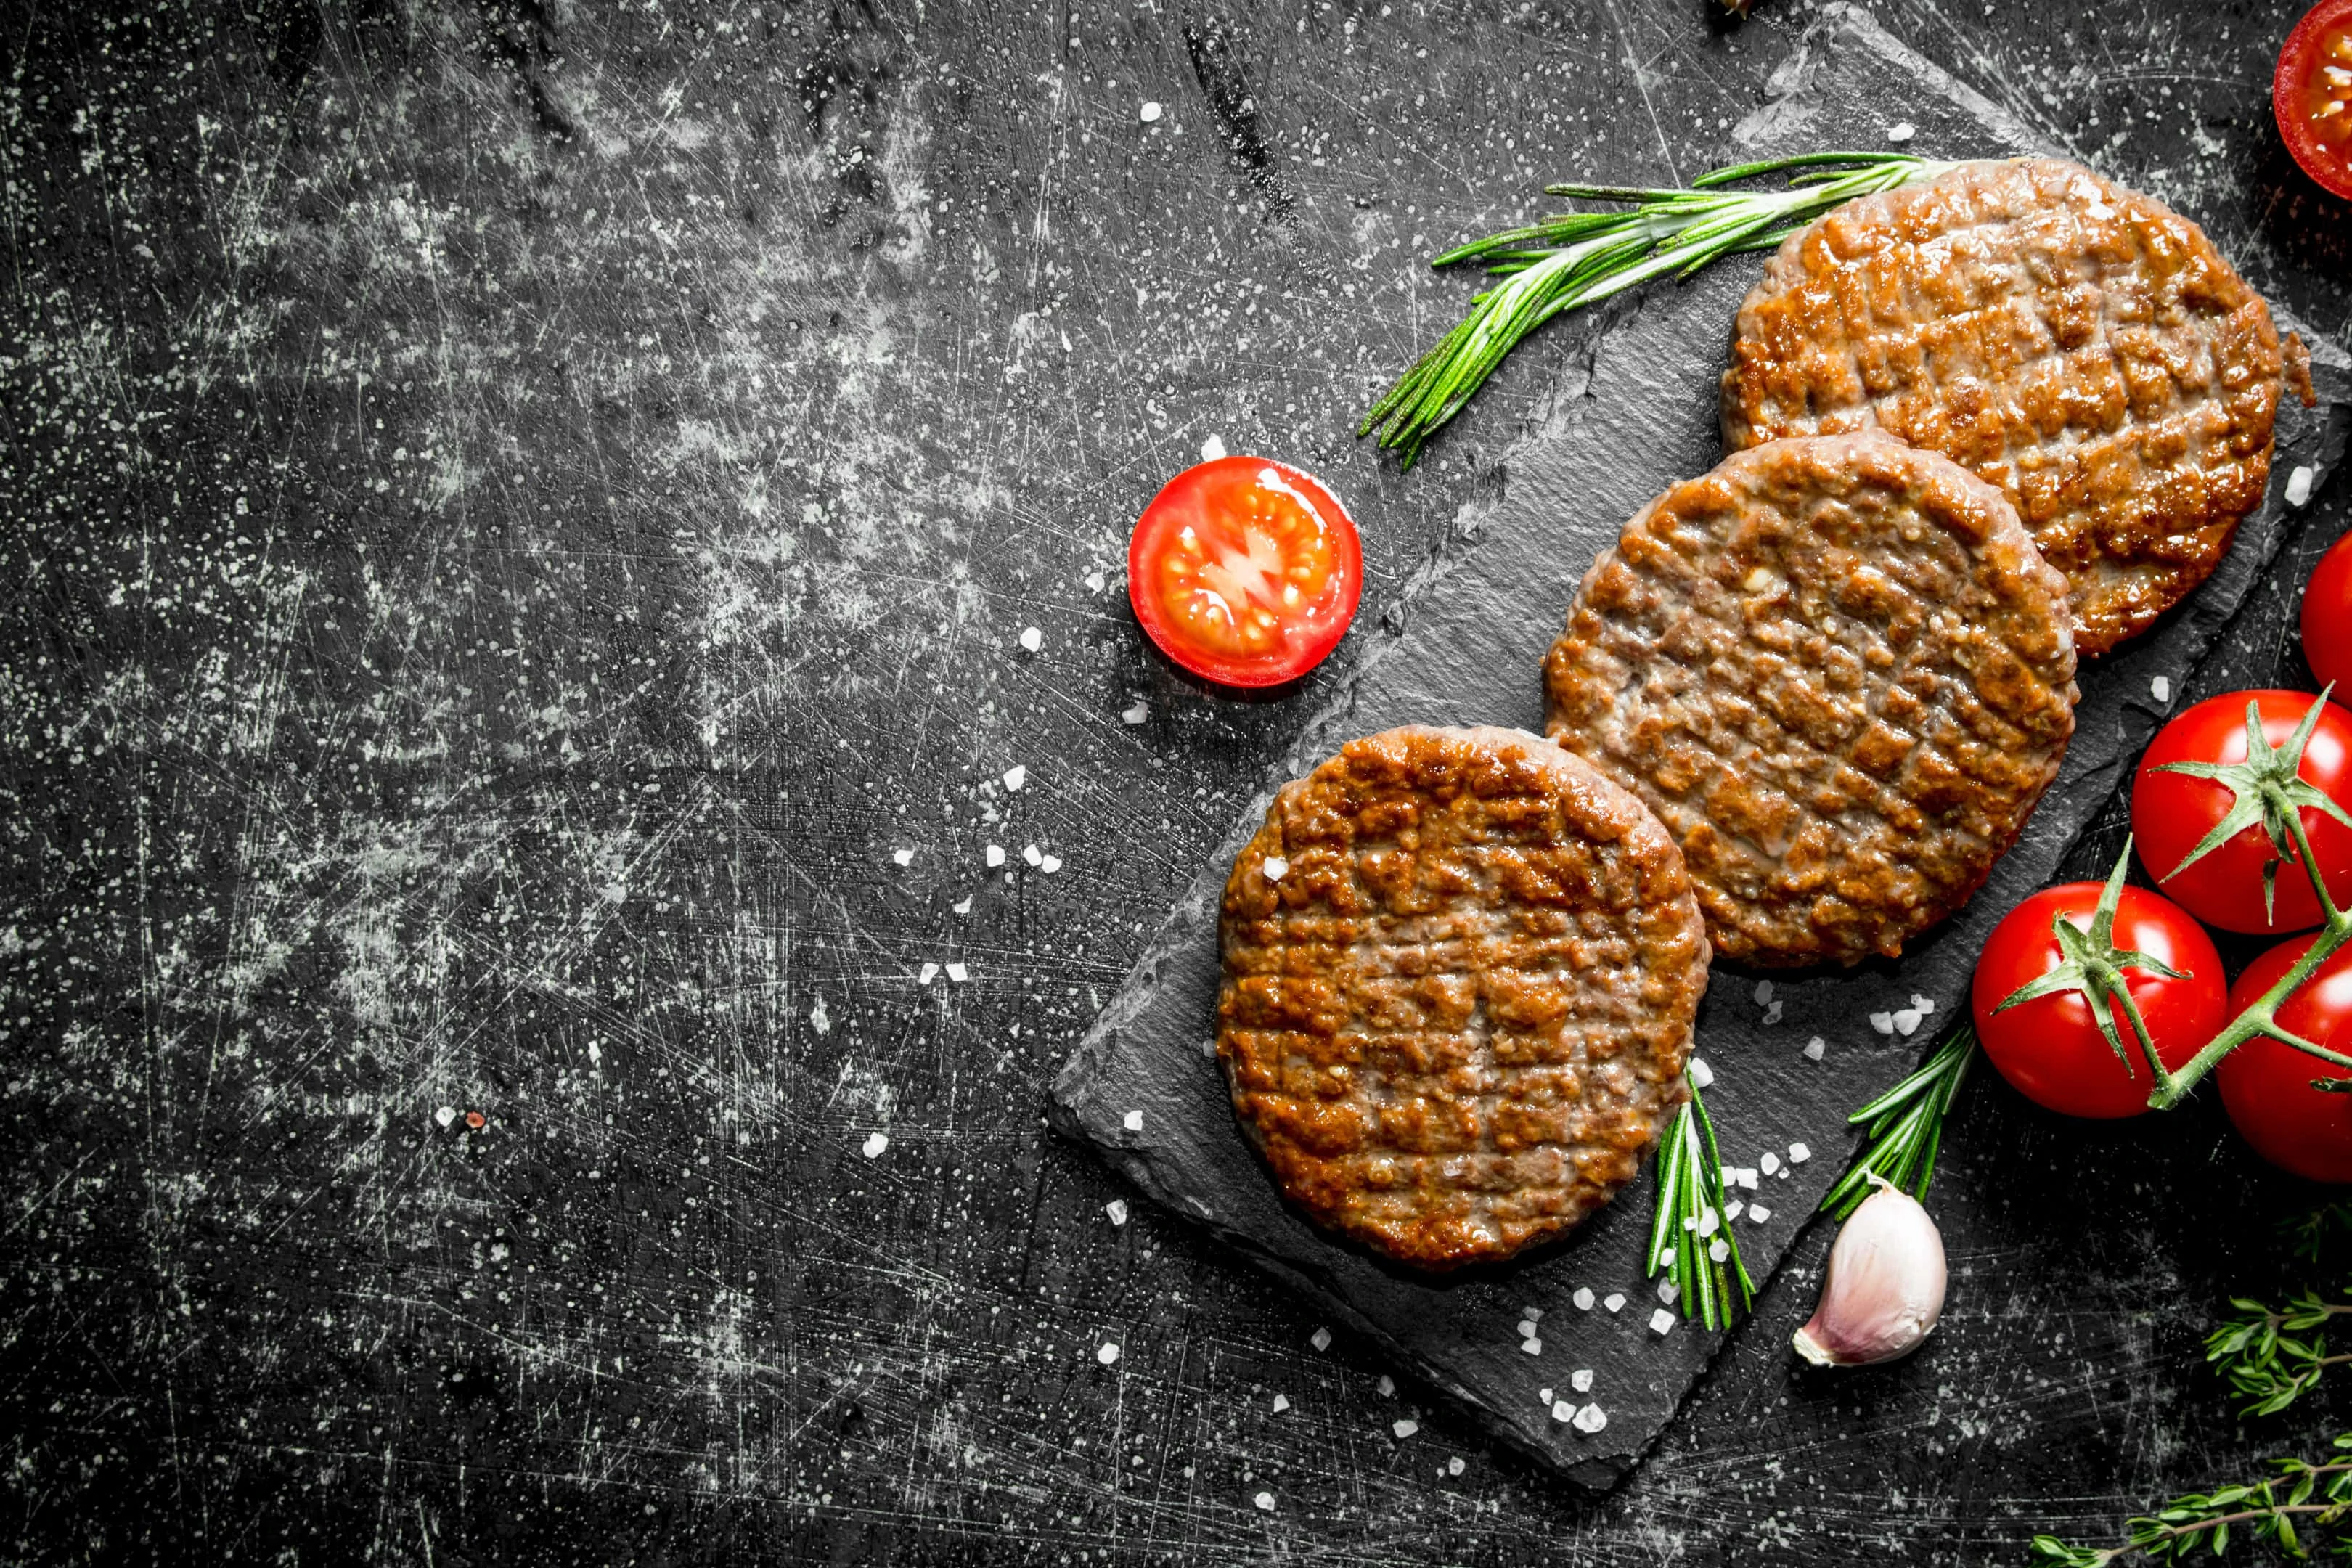 Processed hamburgers with tomatoes on black rustic stone board